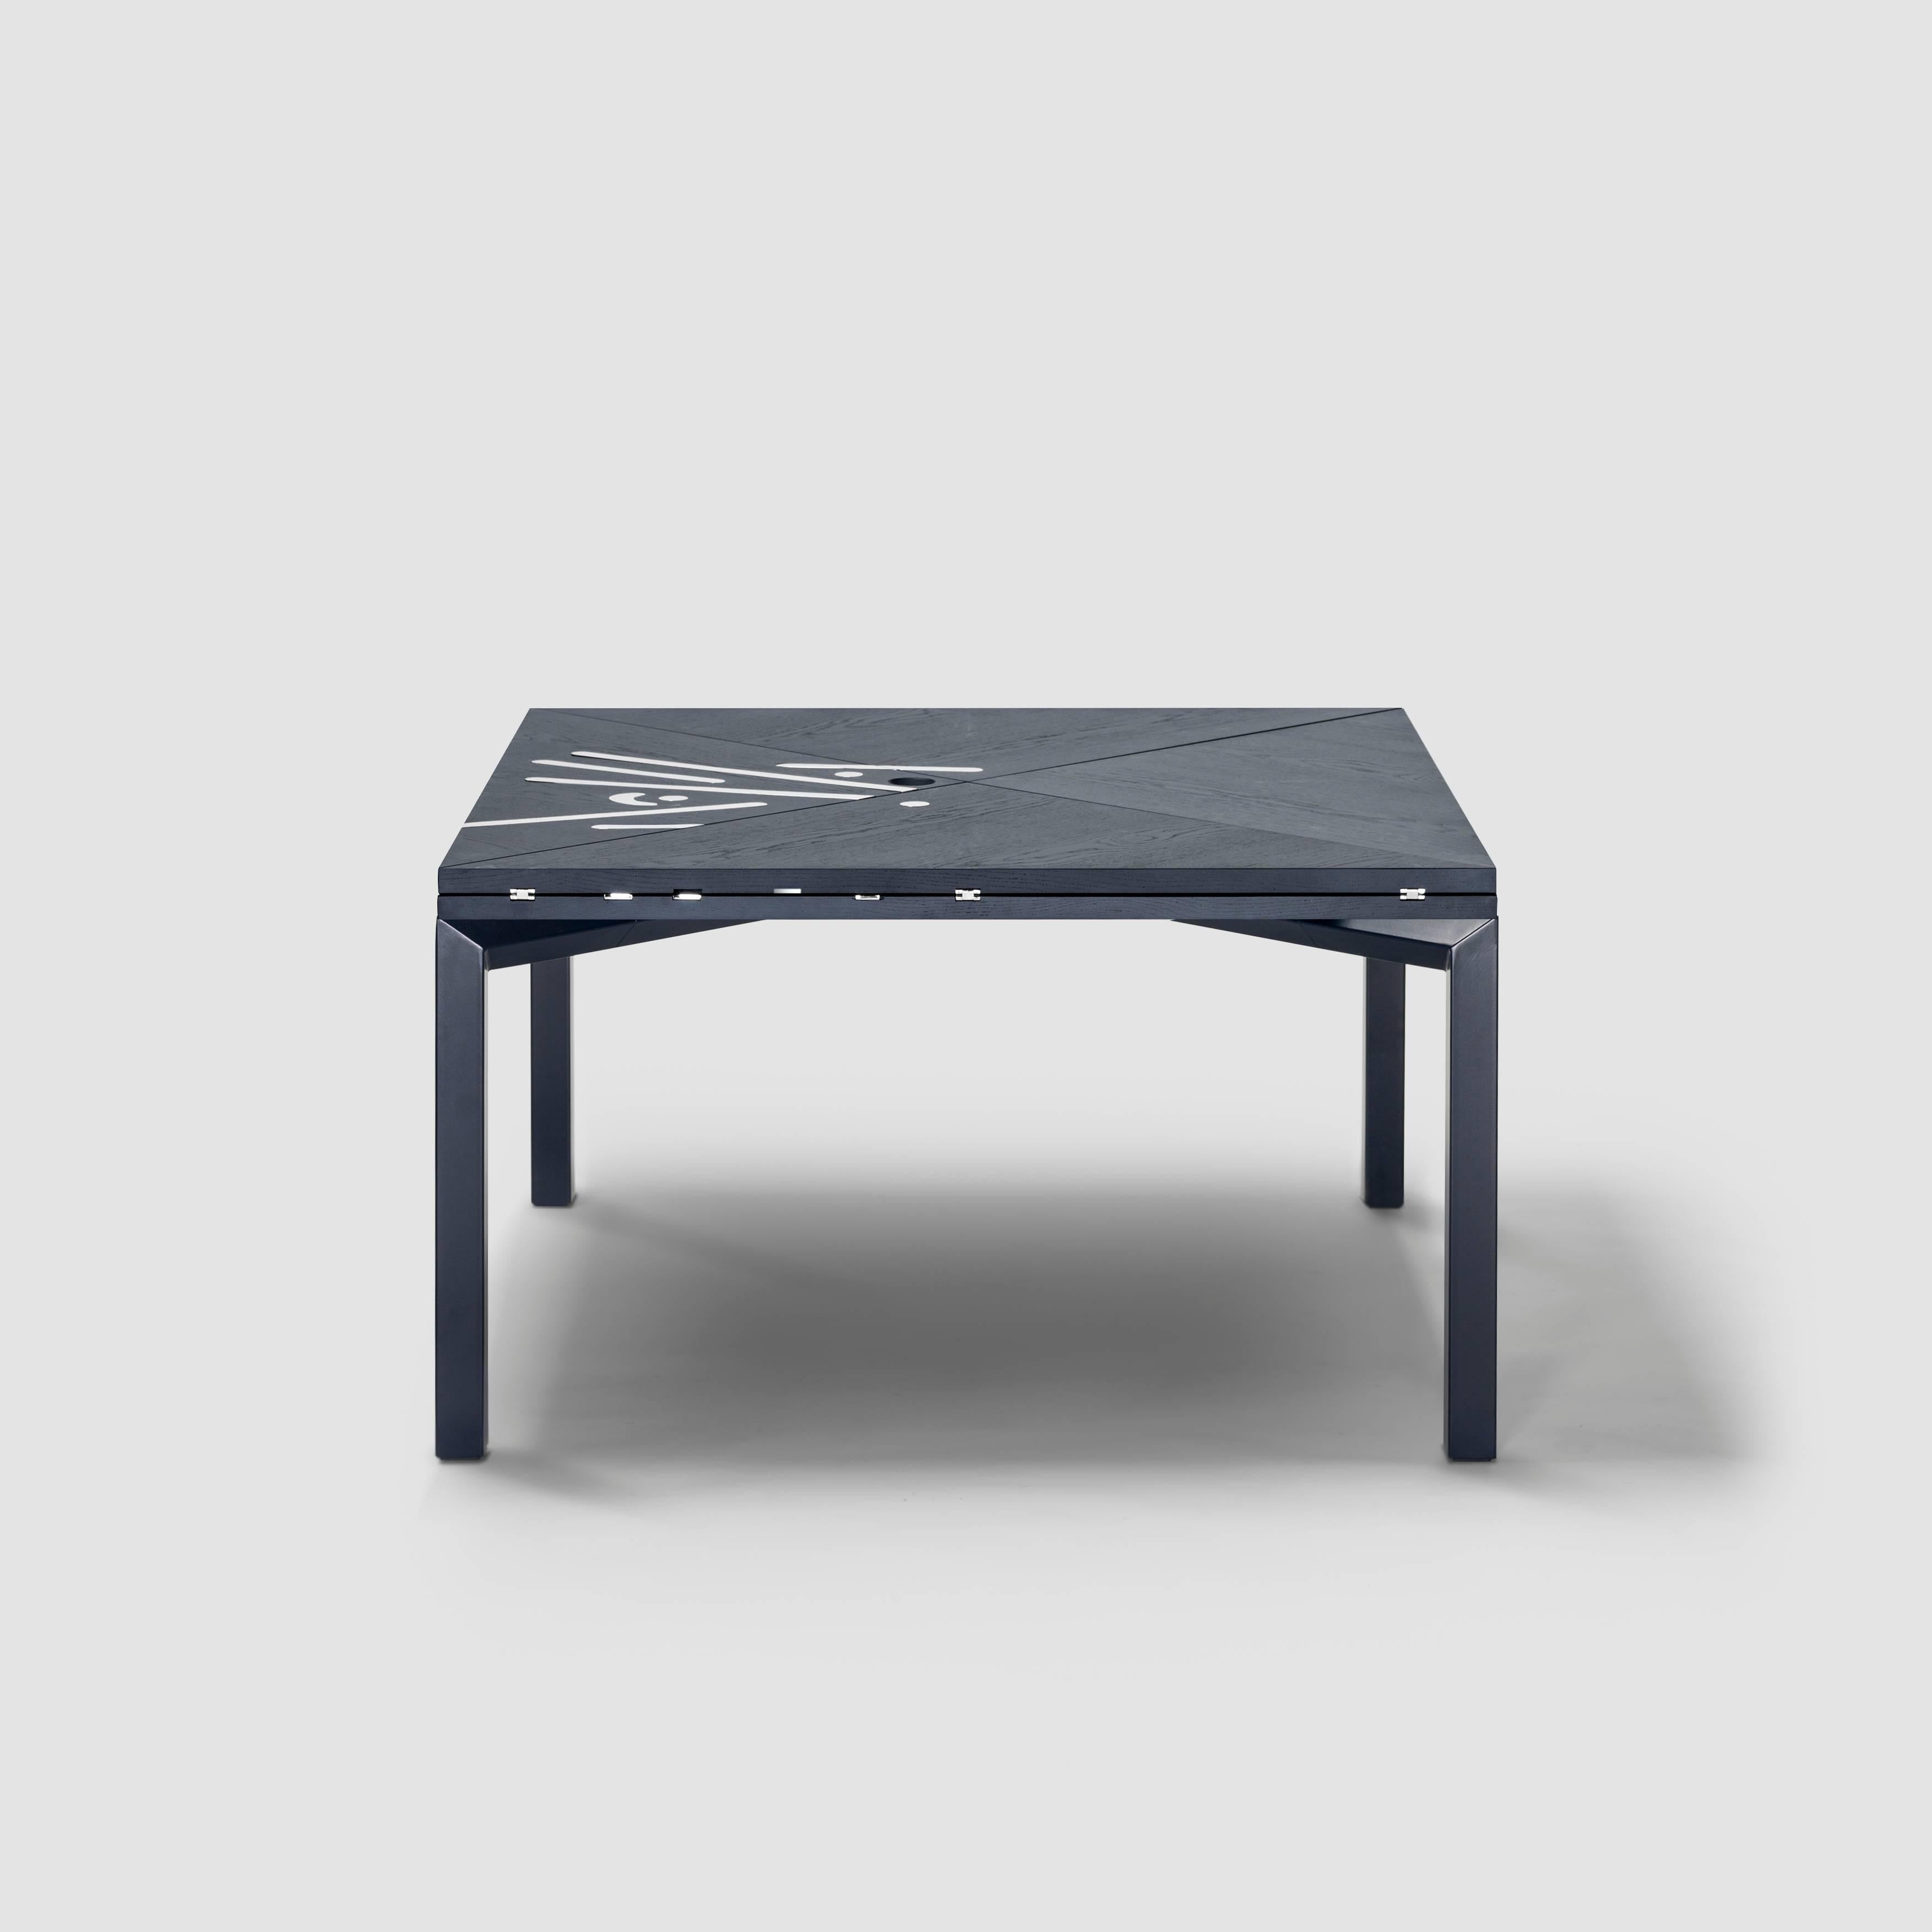 Alella table designed by Lluís Clotet.

Limited edition of 8 units + 2 artist proofs + 2 prototypes.
DM, oak veneered and stained in dark blue RAL 5004.
Legs in an iron rectangular tube lacquered in the same colour as the top.
Decorative chrome